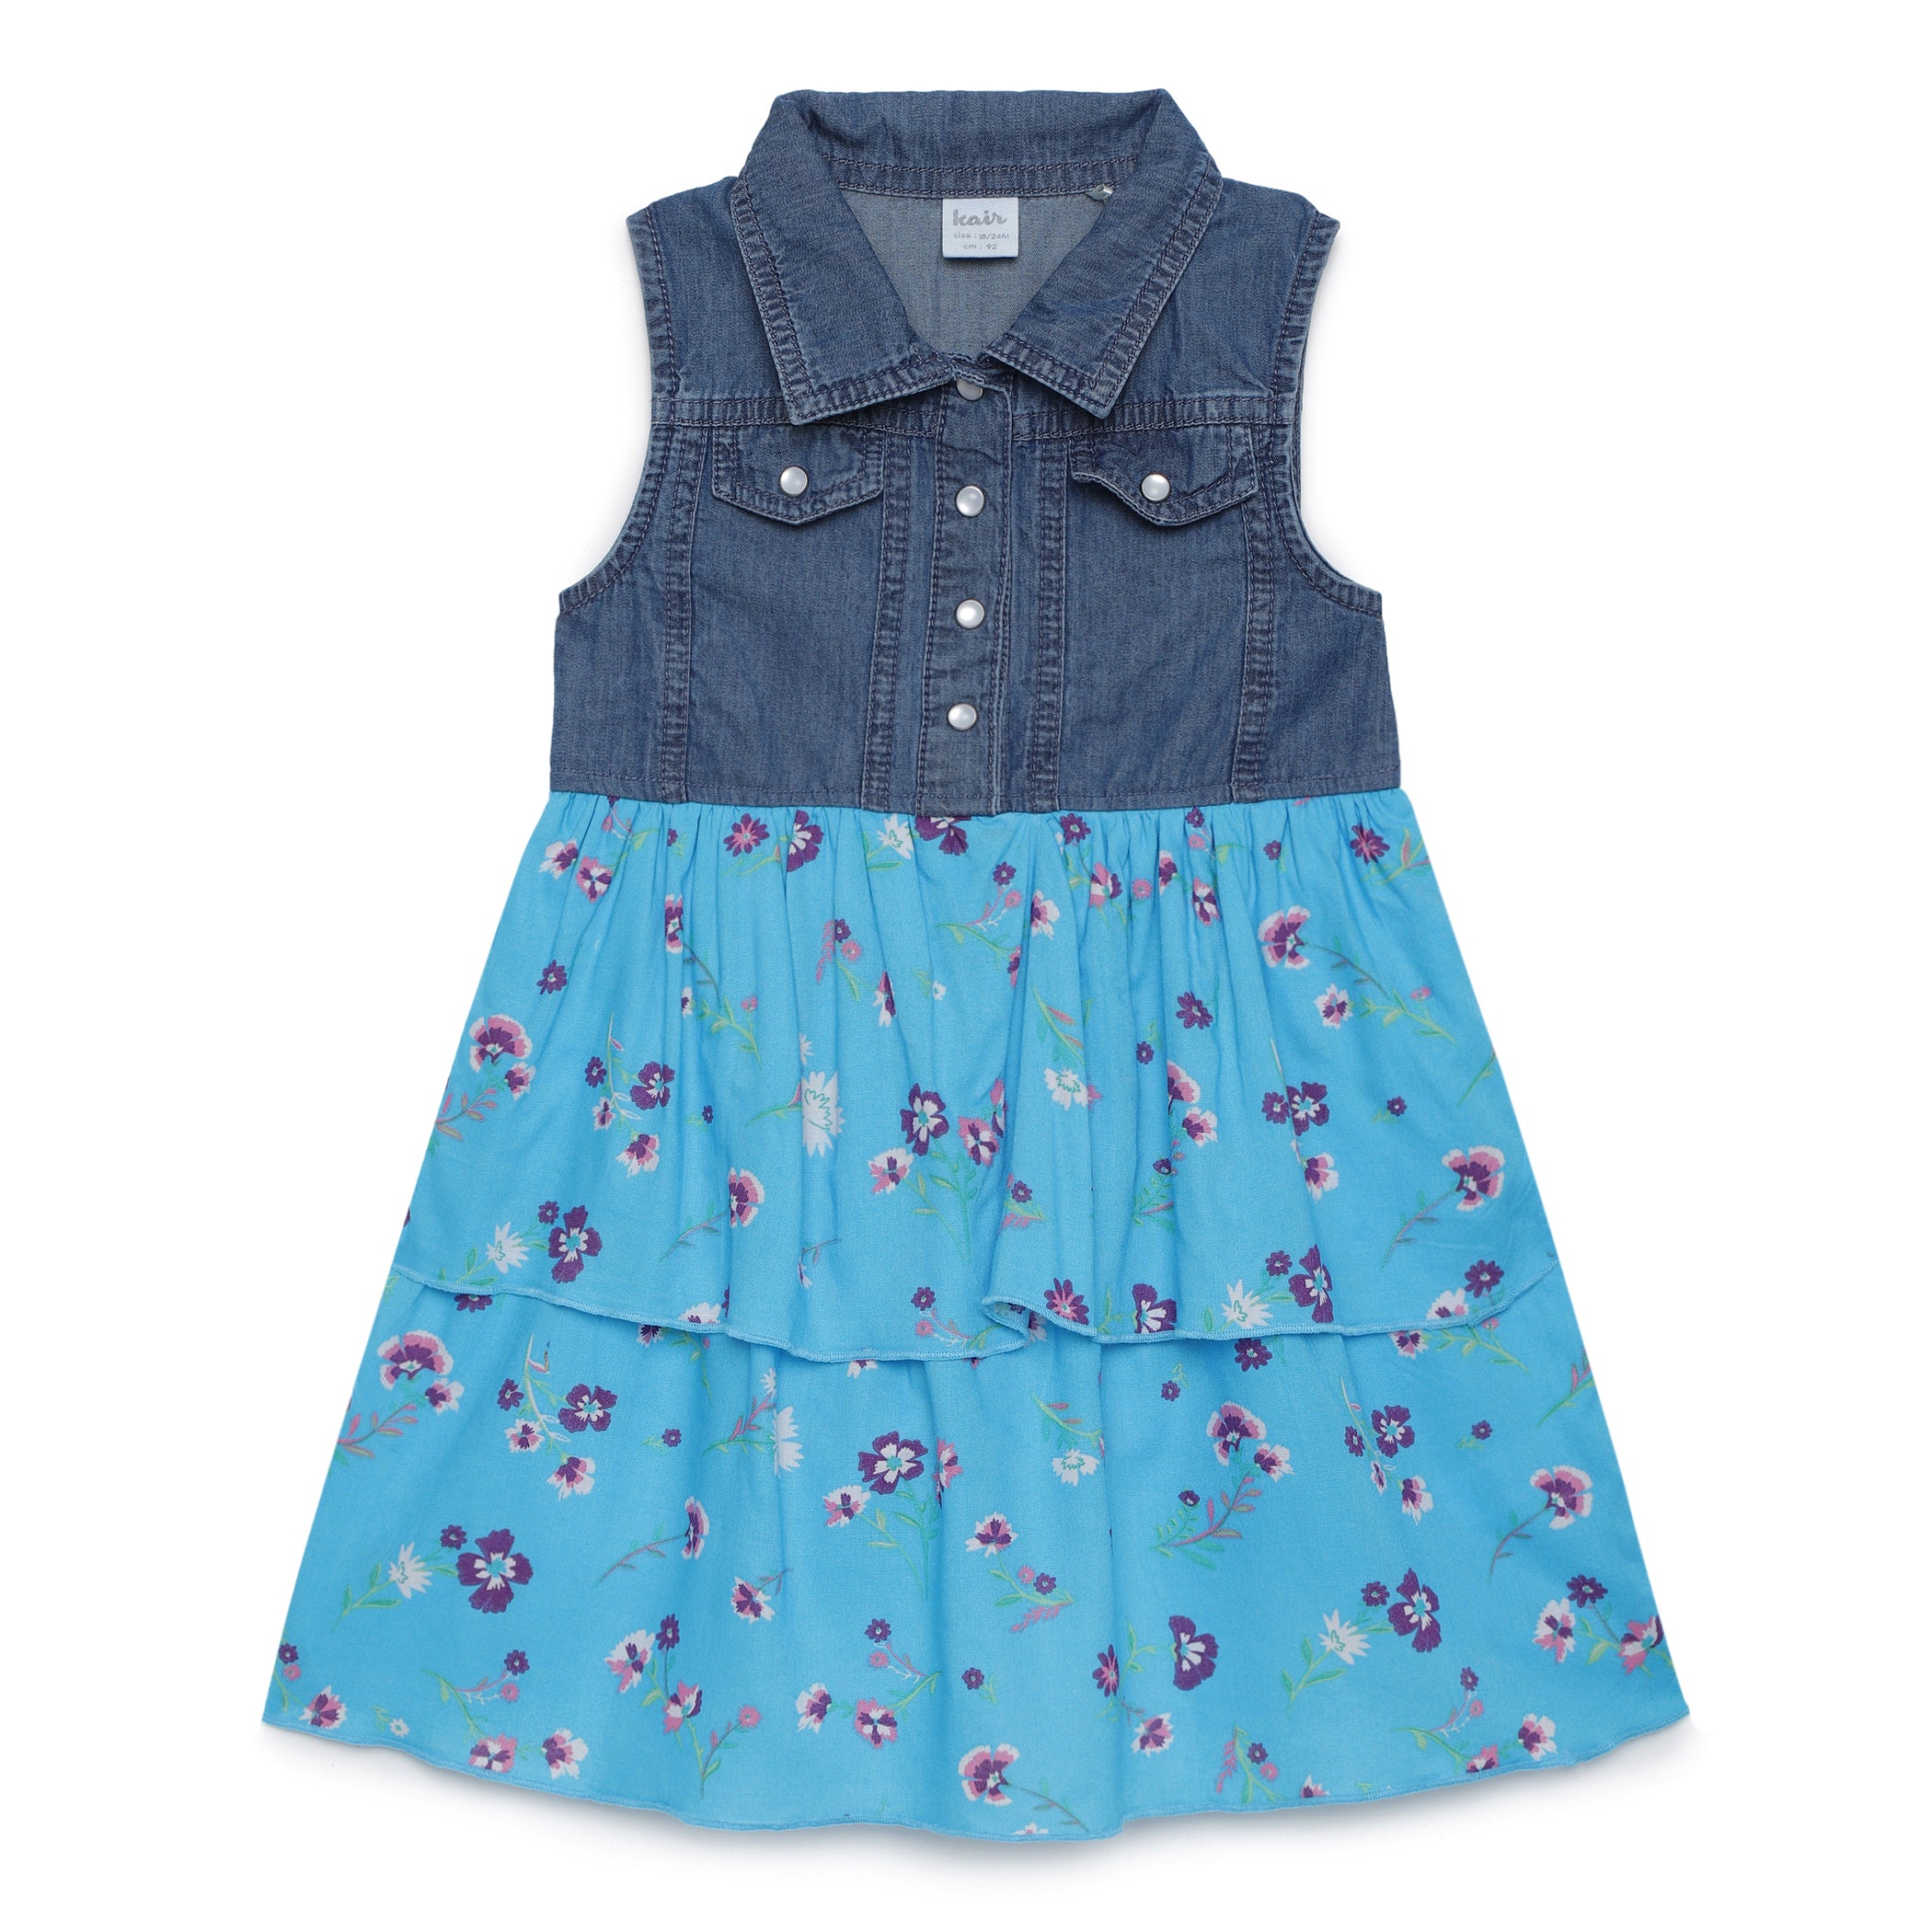 Amazon.com: BSaogr Kids Girls Casual Denim Shirt Dresses,Toddler Button  Pocket Dress Long Sleeve Party with Belt Tunic Romper (Blue, 5-6 Years):  Clothing, Shoes & Jewelry